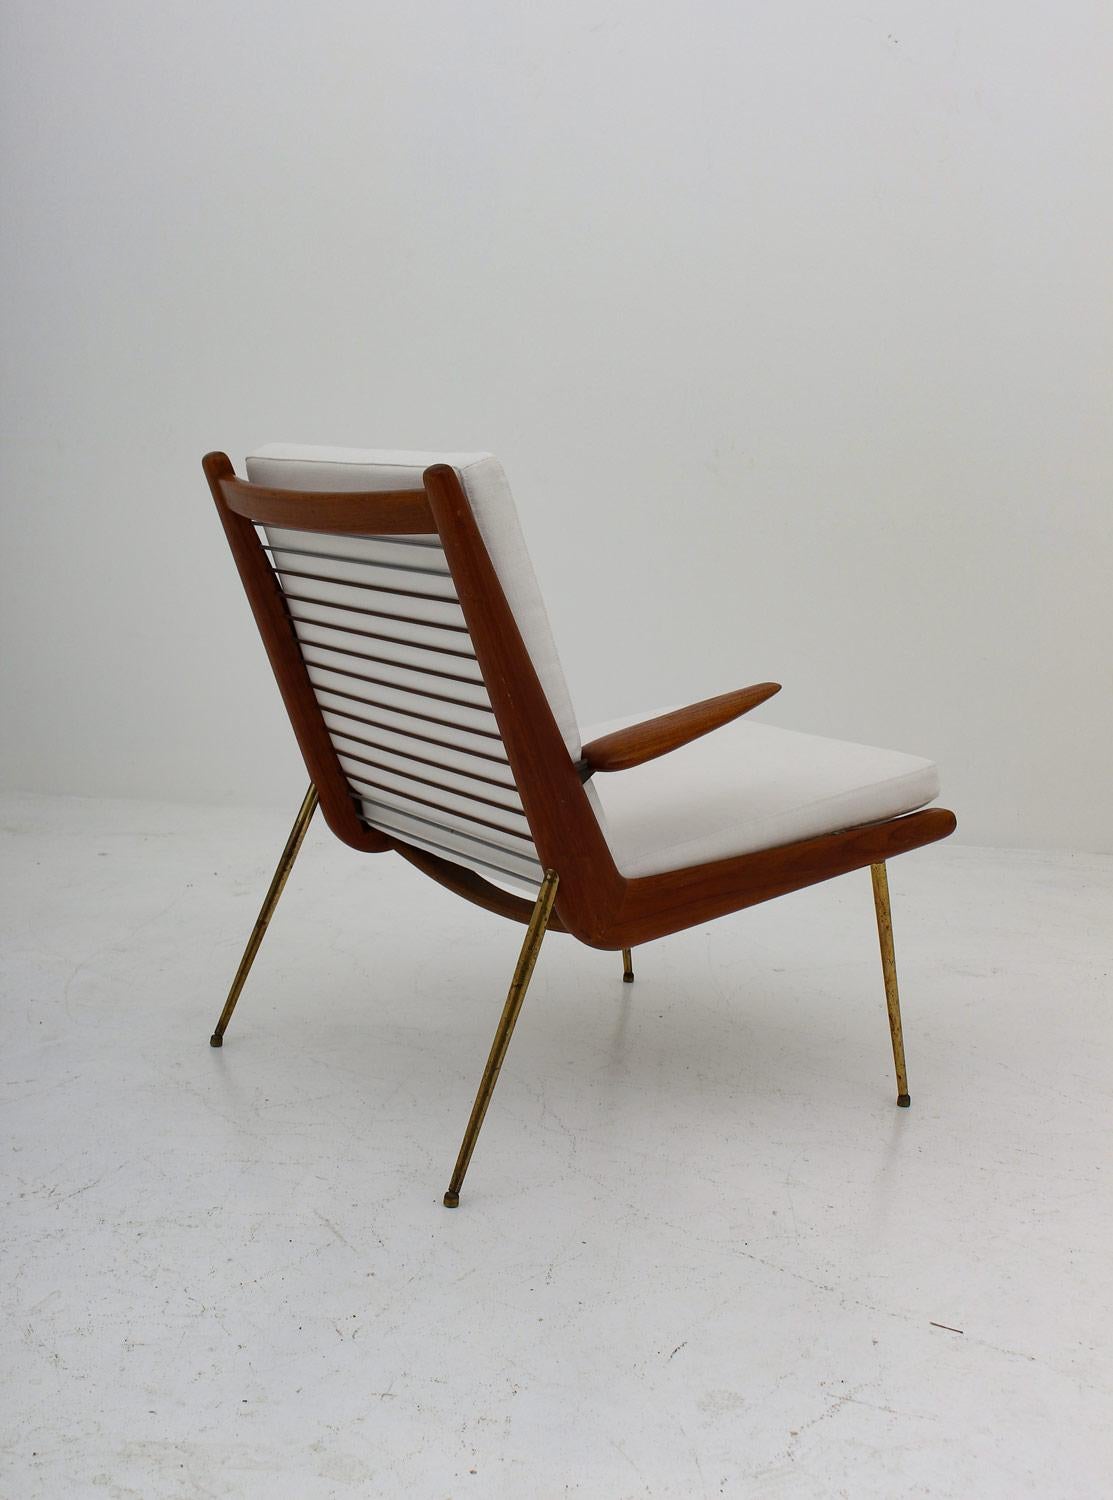 Scandinavian midcentury lounge chairs by Peter Hvidt & Orla Mølgaard-Nielsen, also known as 